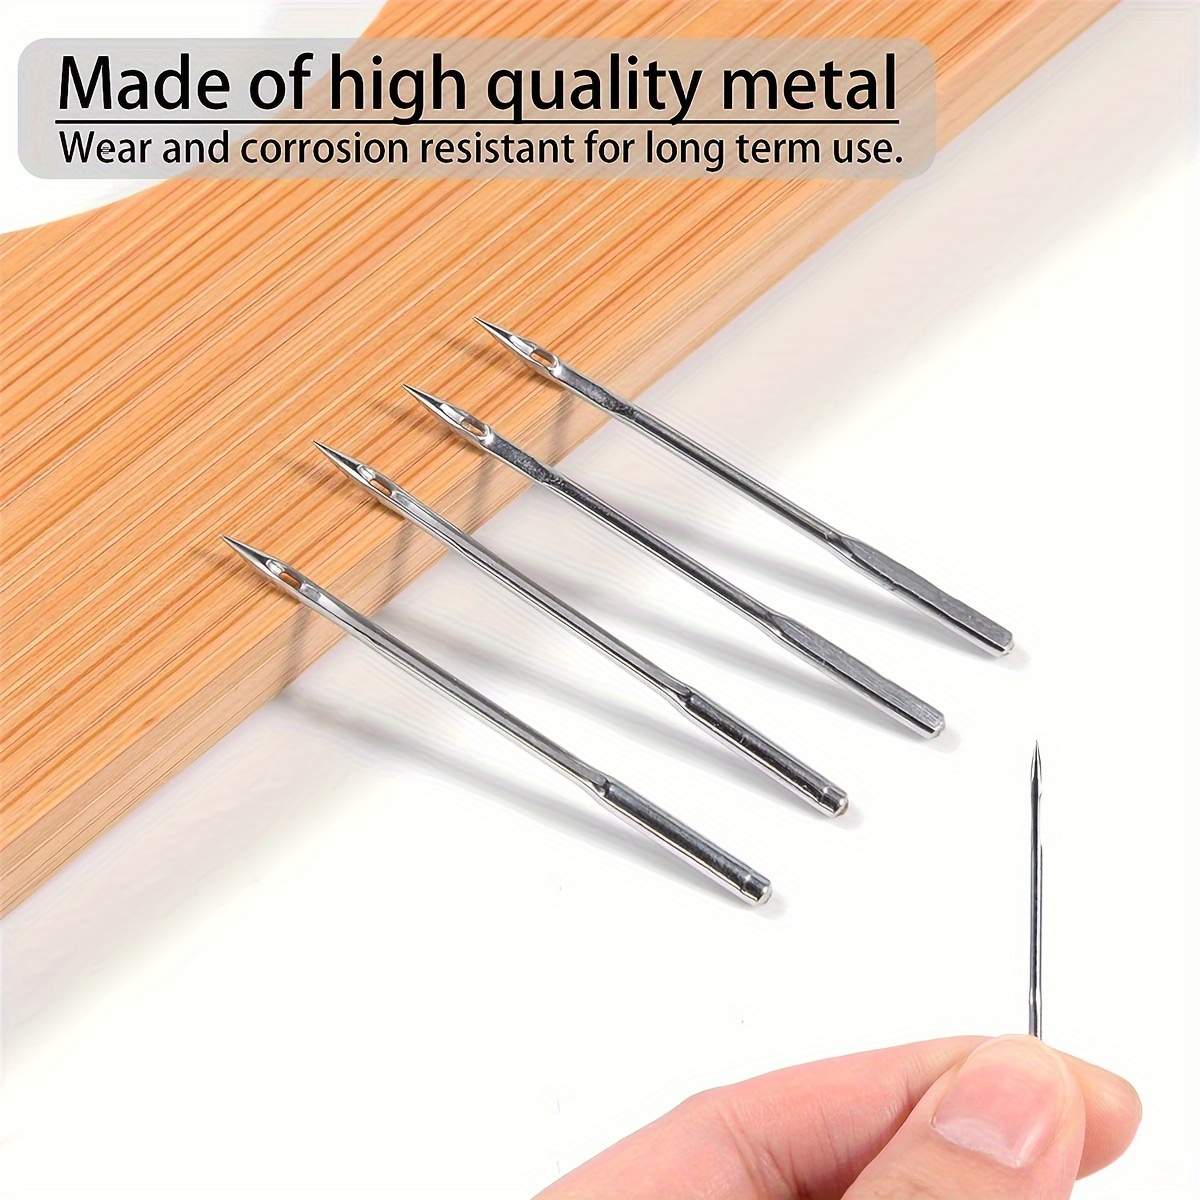 20pcs Sewing Machine Needles for Singer Brother Janome Varmax Sizes 65/9  75/11 80/12 90/14 100/16 Sewing Machine Supplies - AliExpress